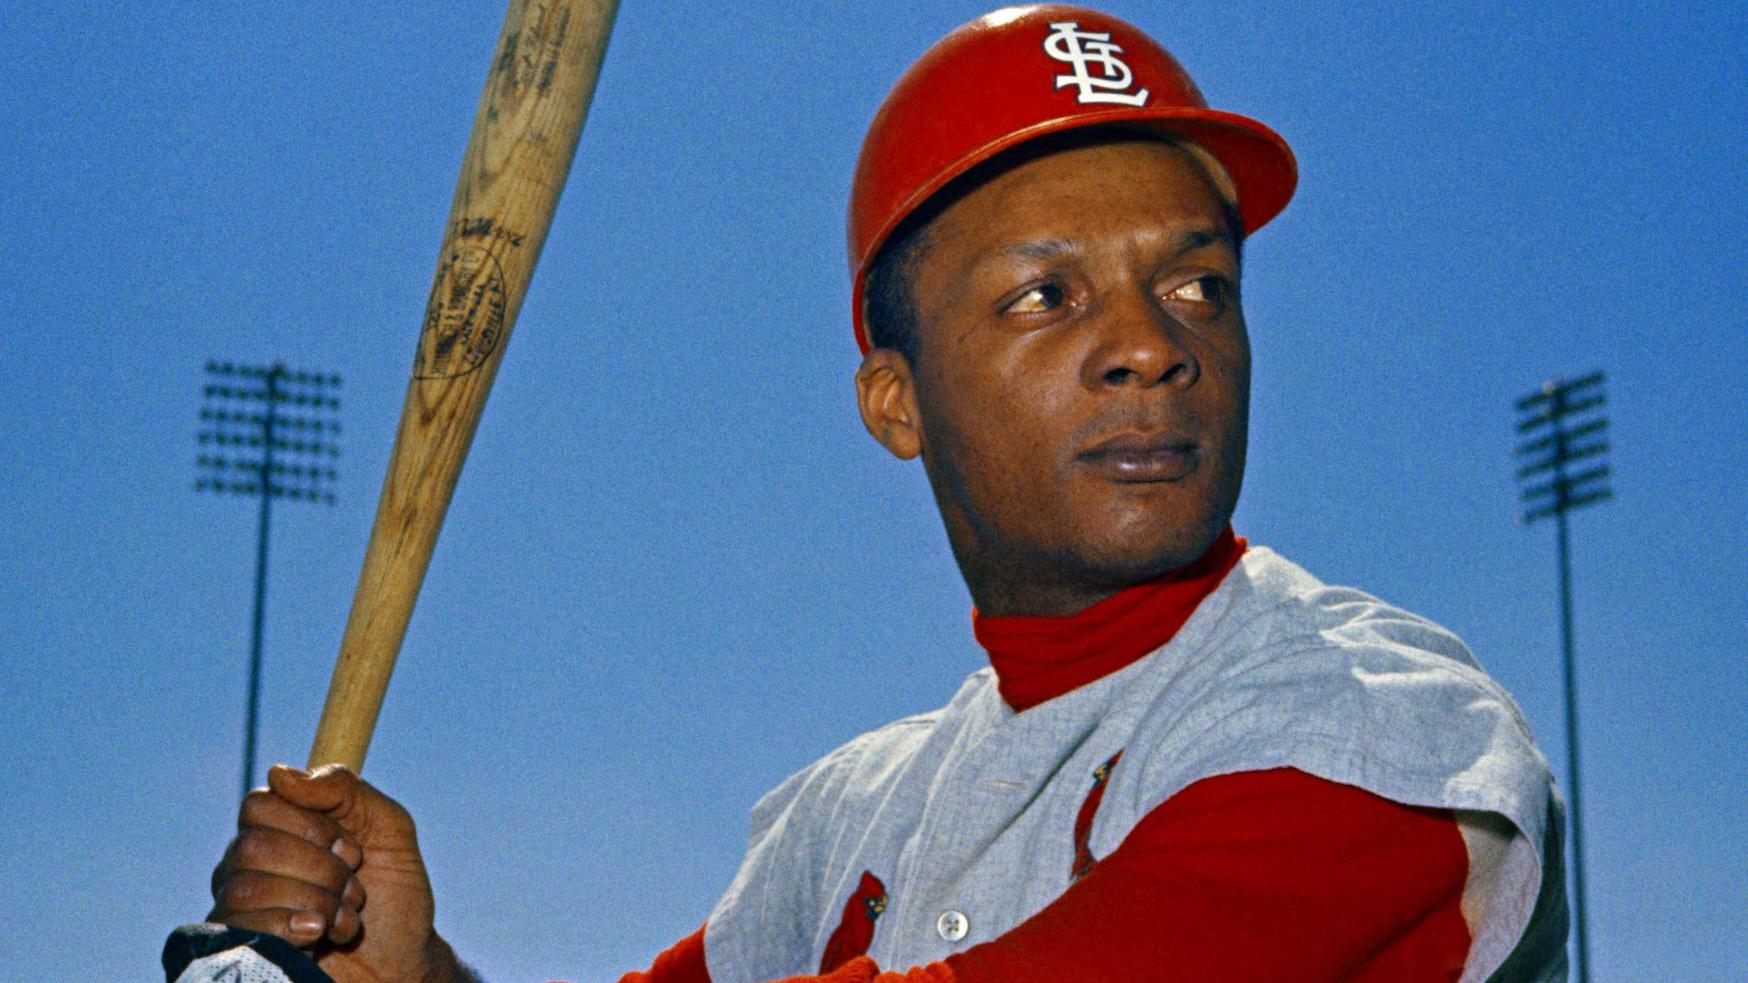 On Dec. 24, 1969, Curt Flood mailed a letter that changed baseball history